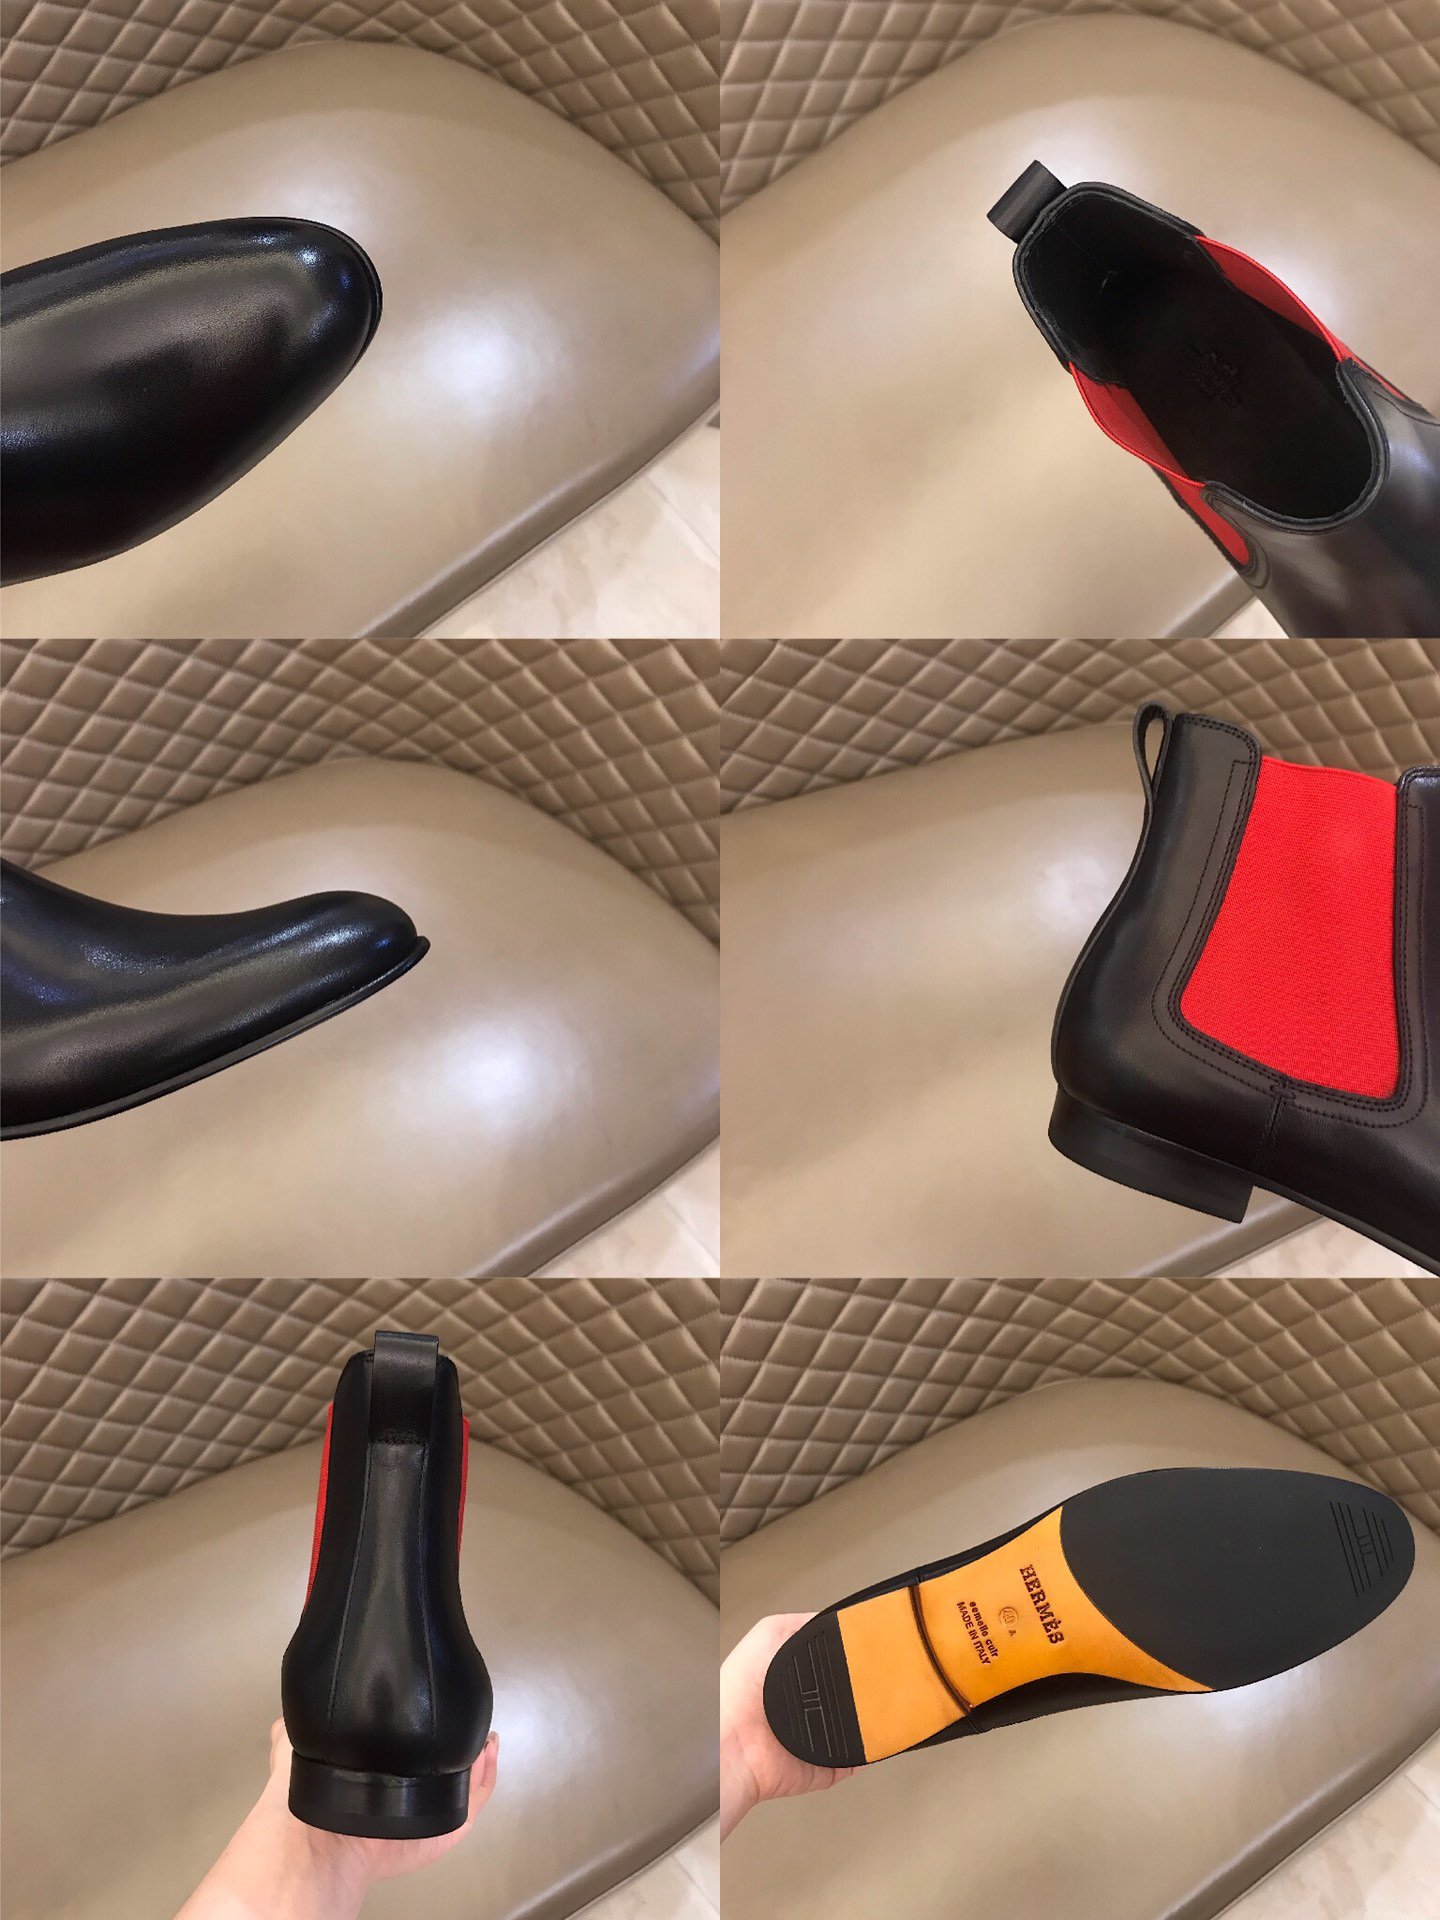 Hermes Chelsea Black and red Boots MS021089